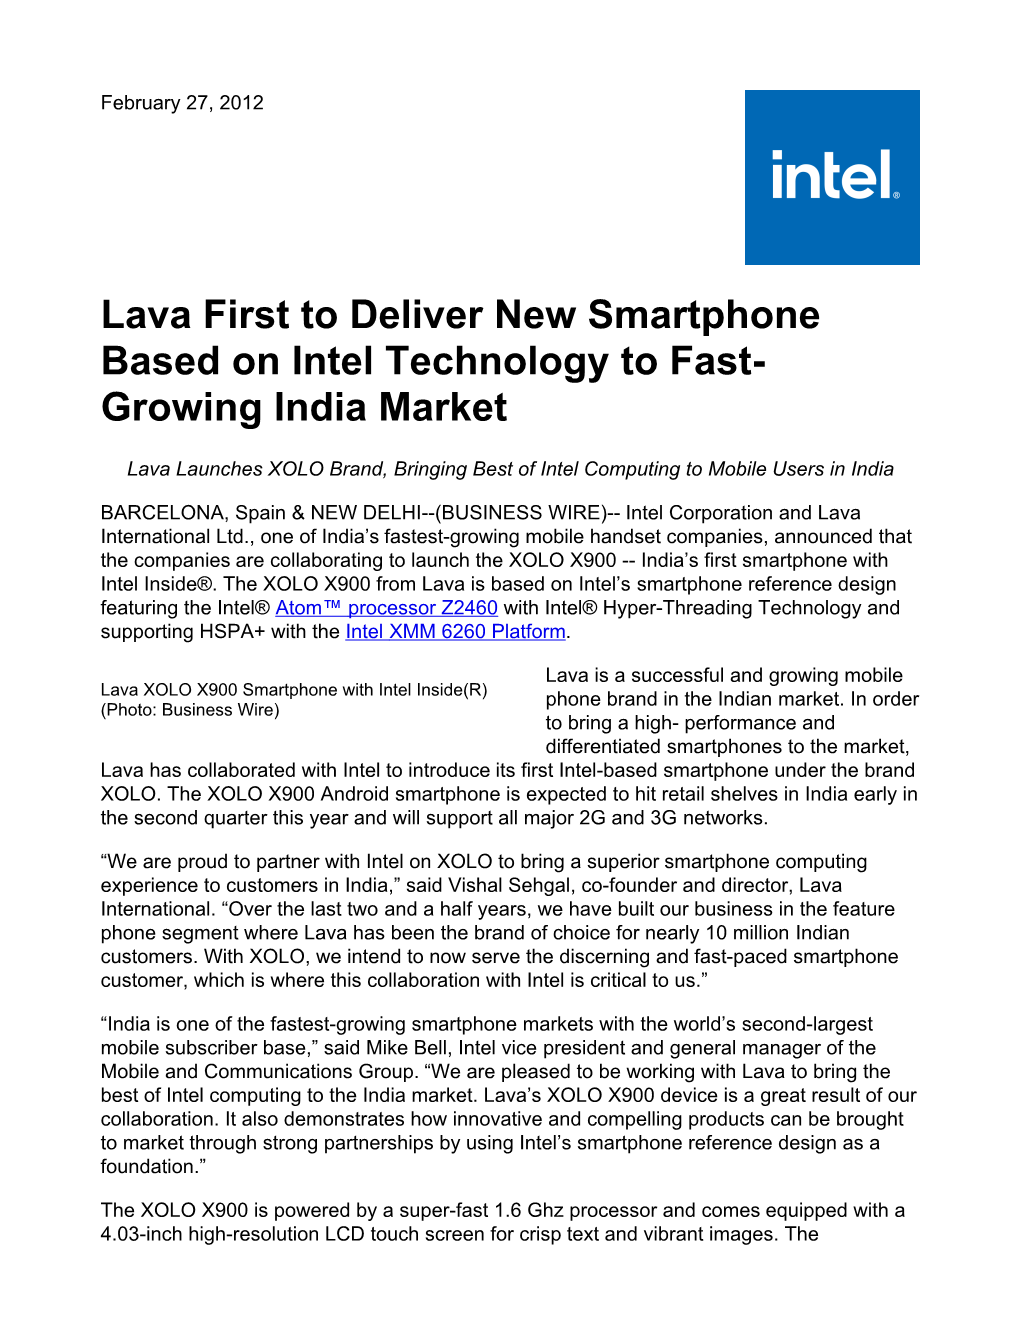 Lava First to Deliver New Smartphone Based on Intel Technology to Fast- Growing India Market